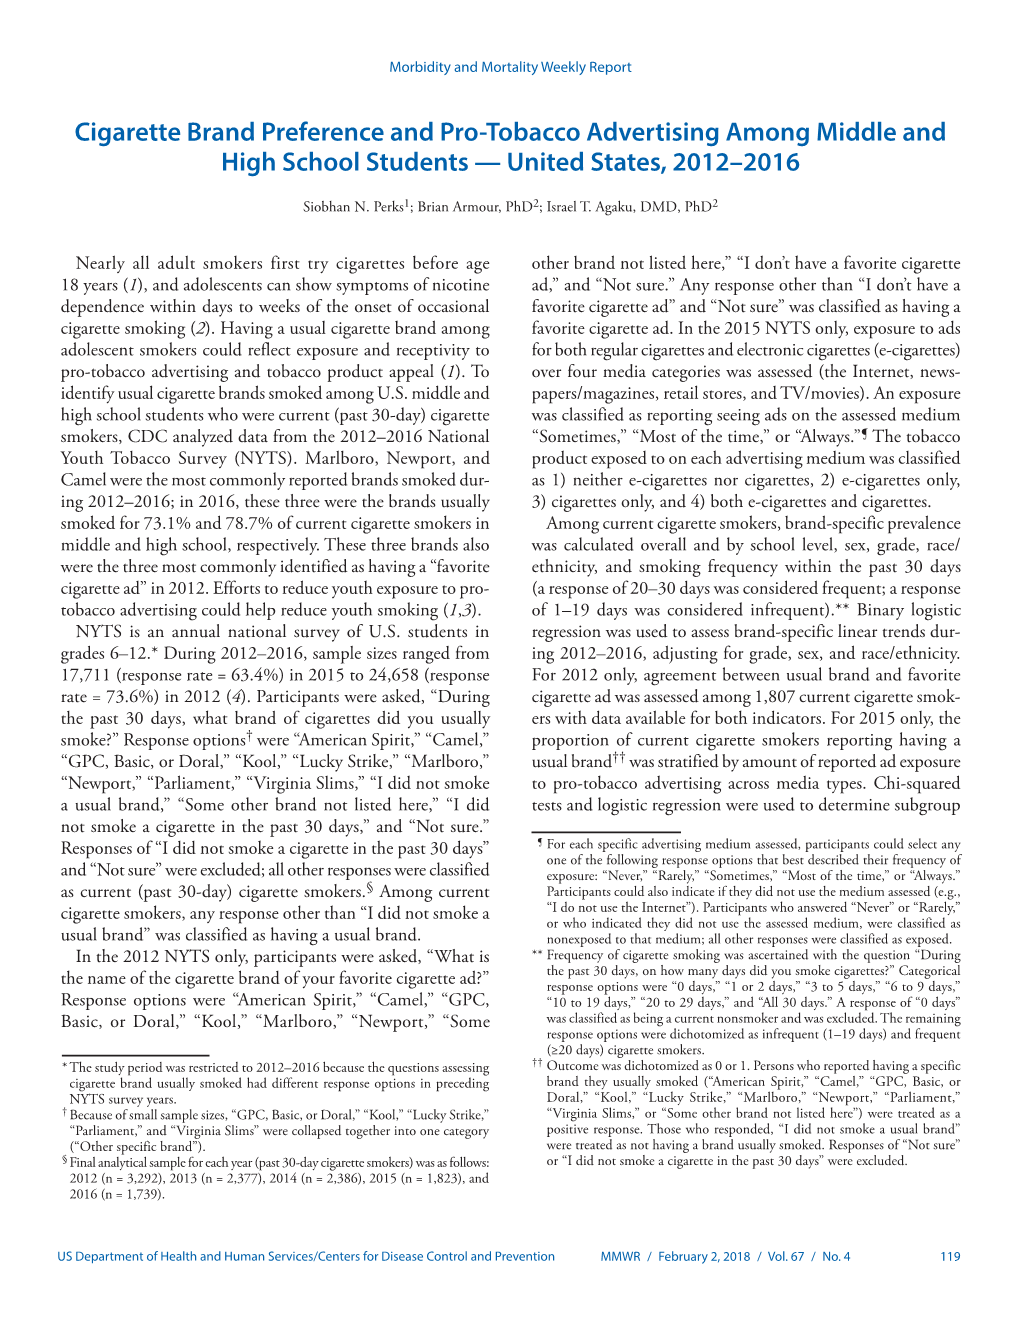 Cigarette Brand Preference and Pro-Tobacco Advertising Among Middle and High School Students — United States, 2012–2016